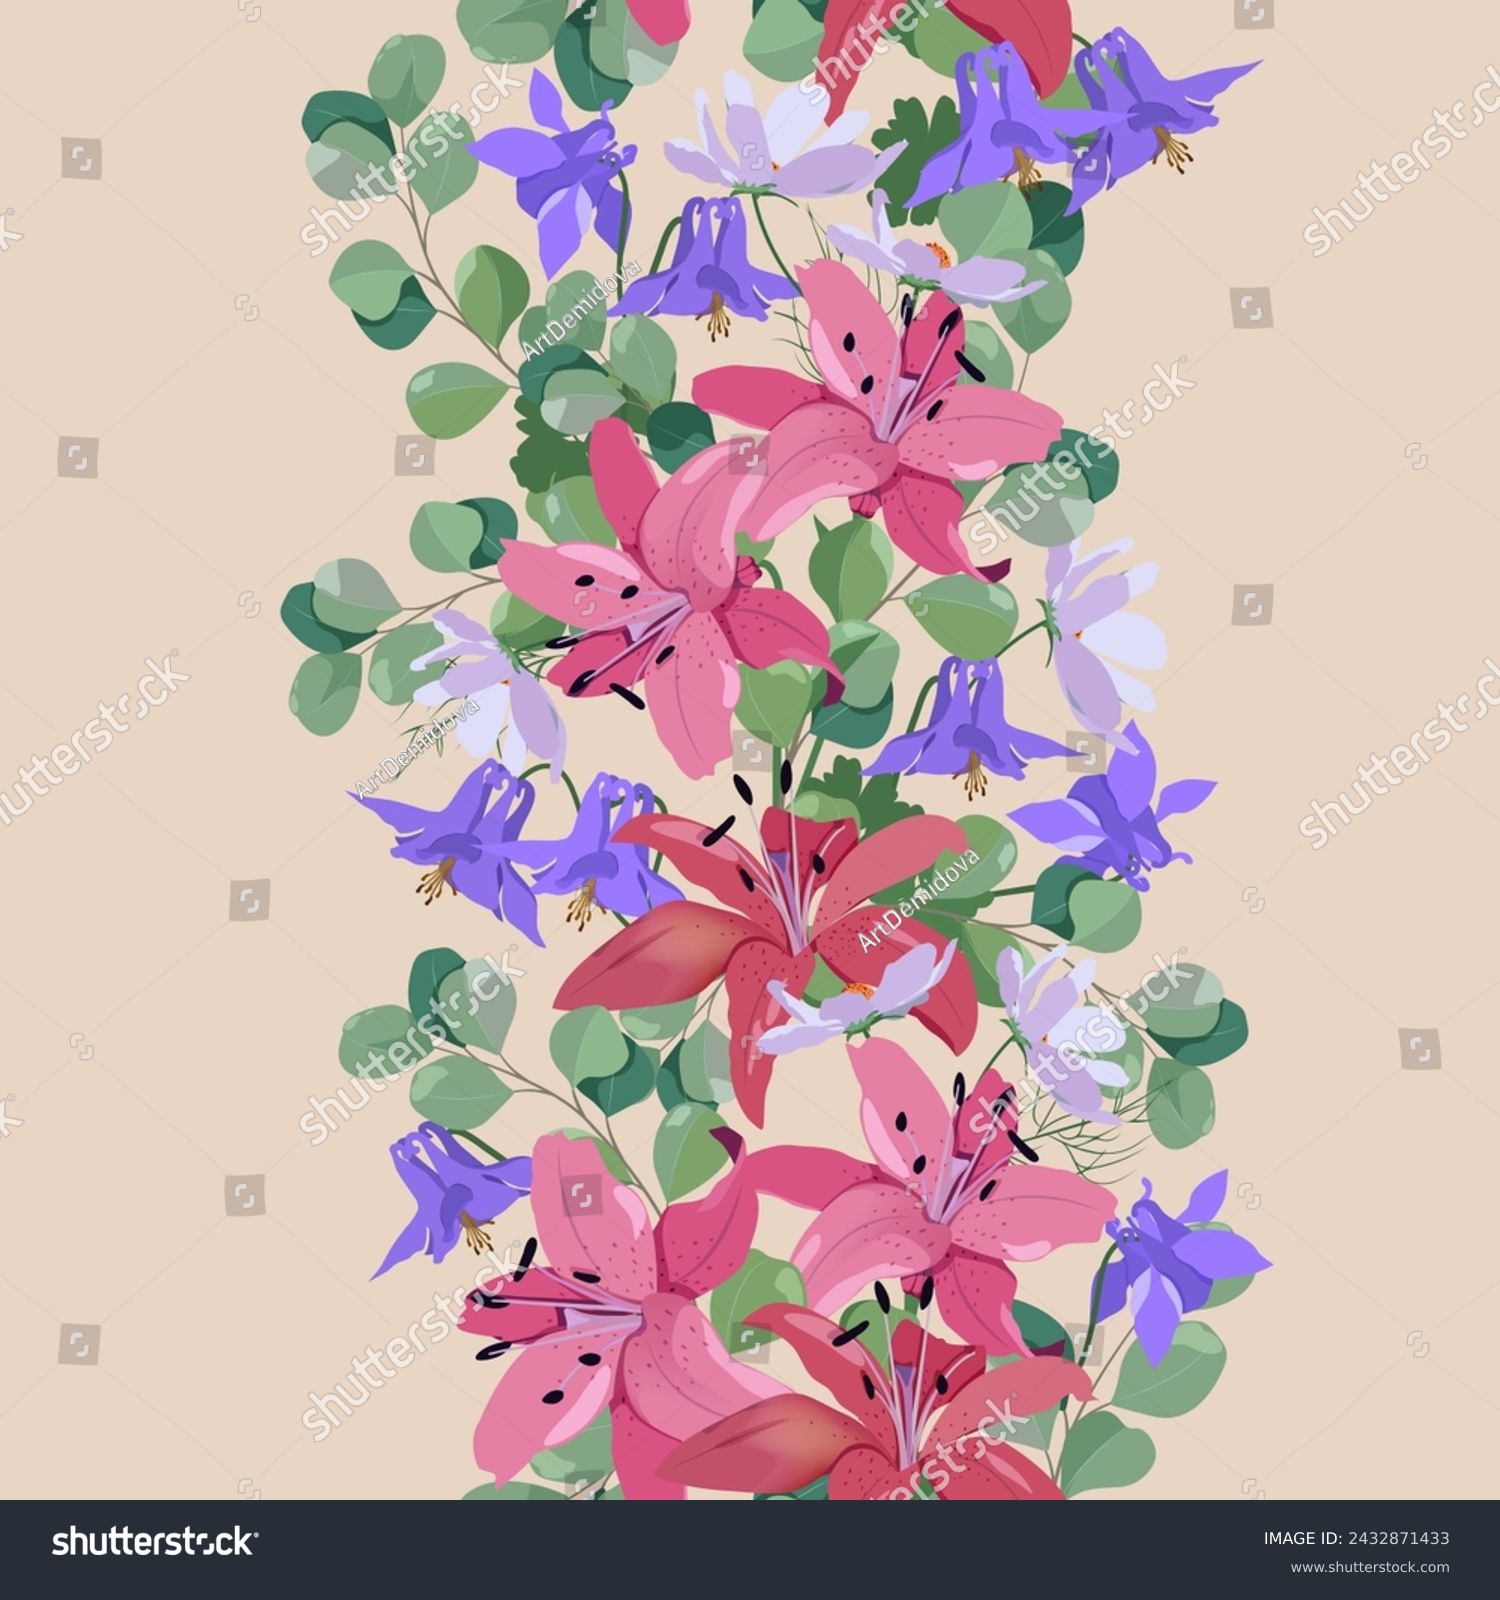 Beautiful lilies and aquilegia. Seamless vector illustration. For decorating textiles, packaging, wallpaper. #2432871433